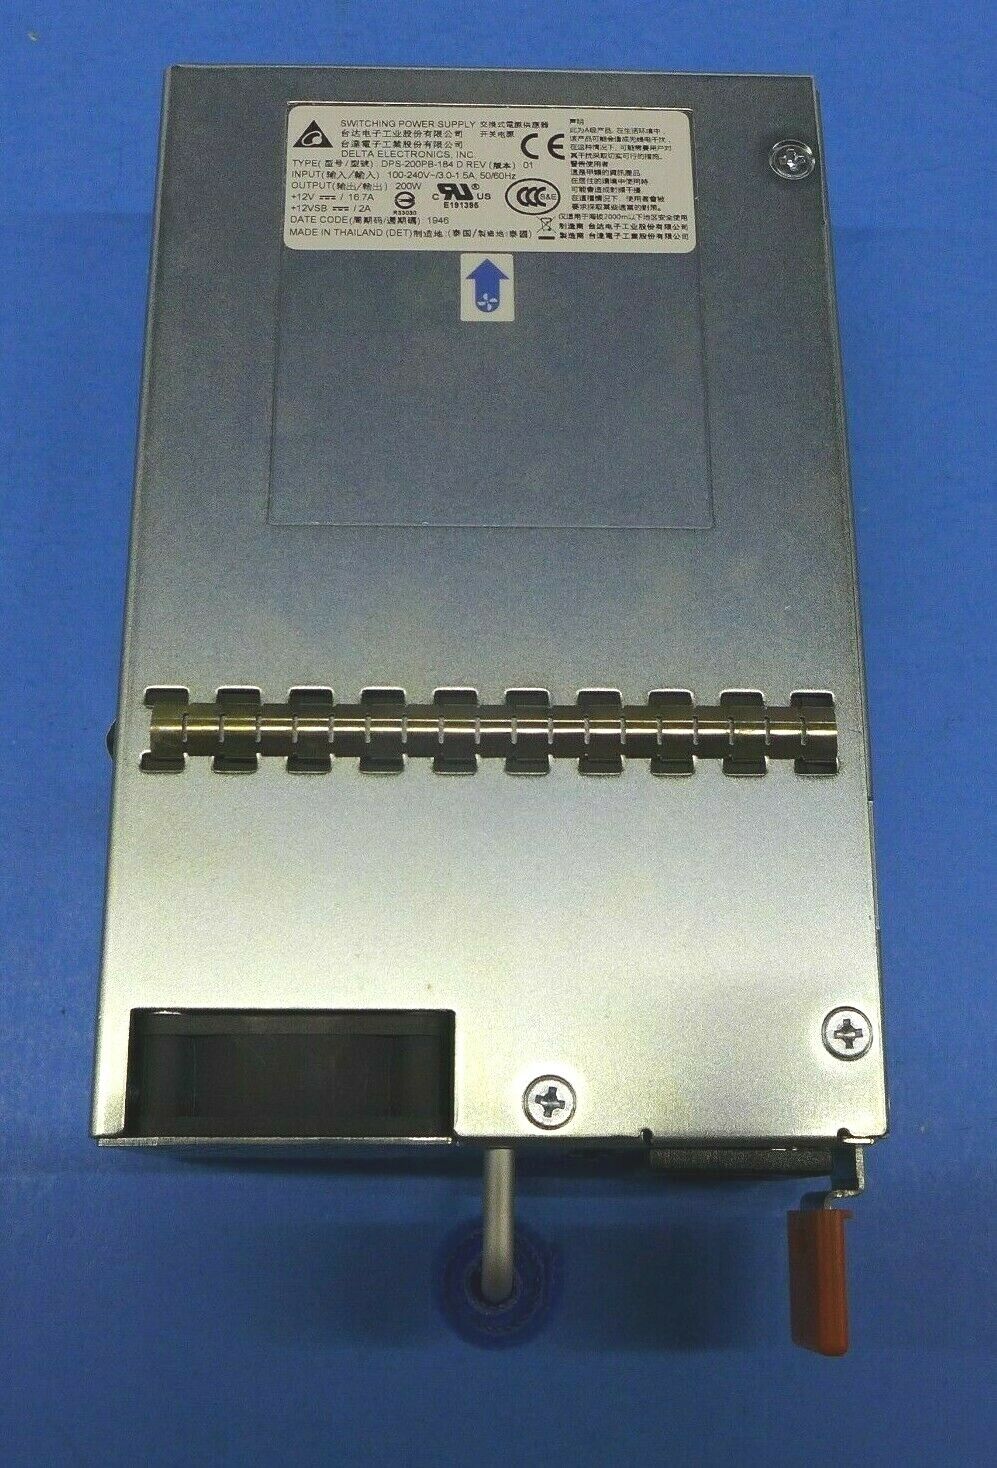 New Dell Power Connect S3048-ON 200W Power Supply DPS-200PB-184 0X3X6